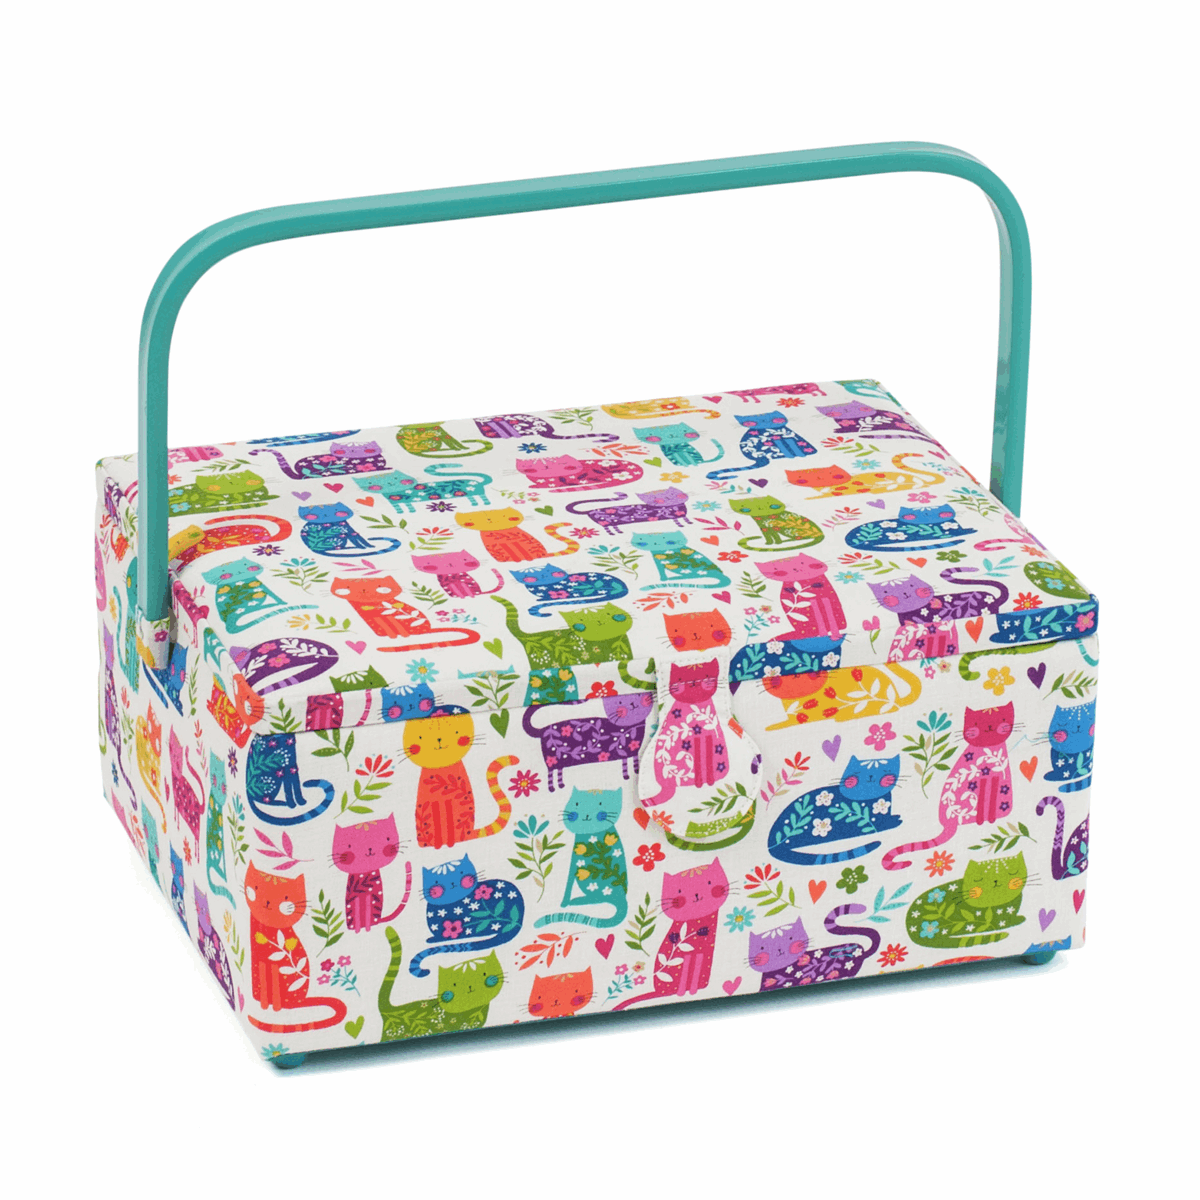 Cats Sewing Box - Large